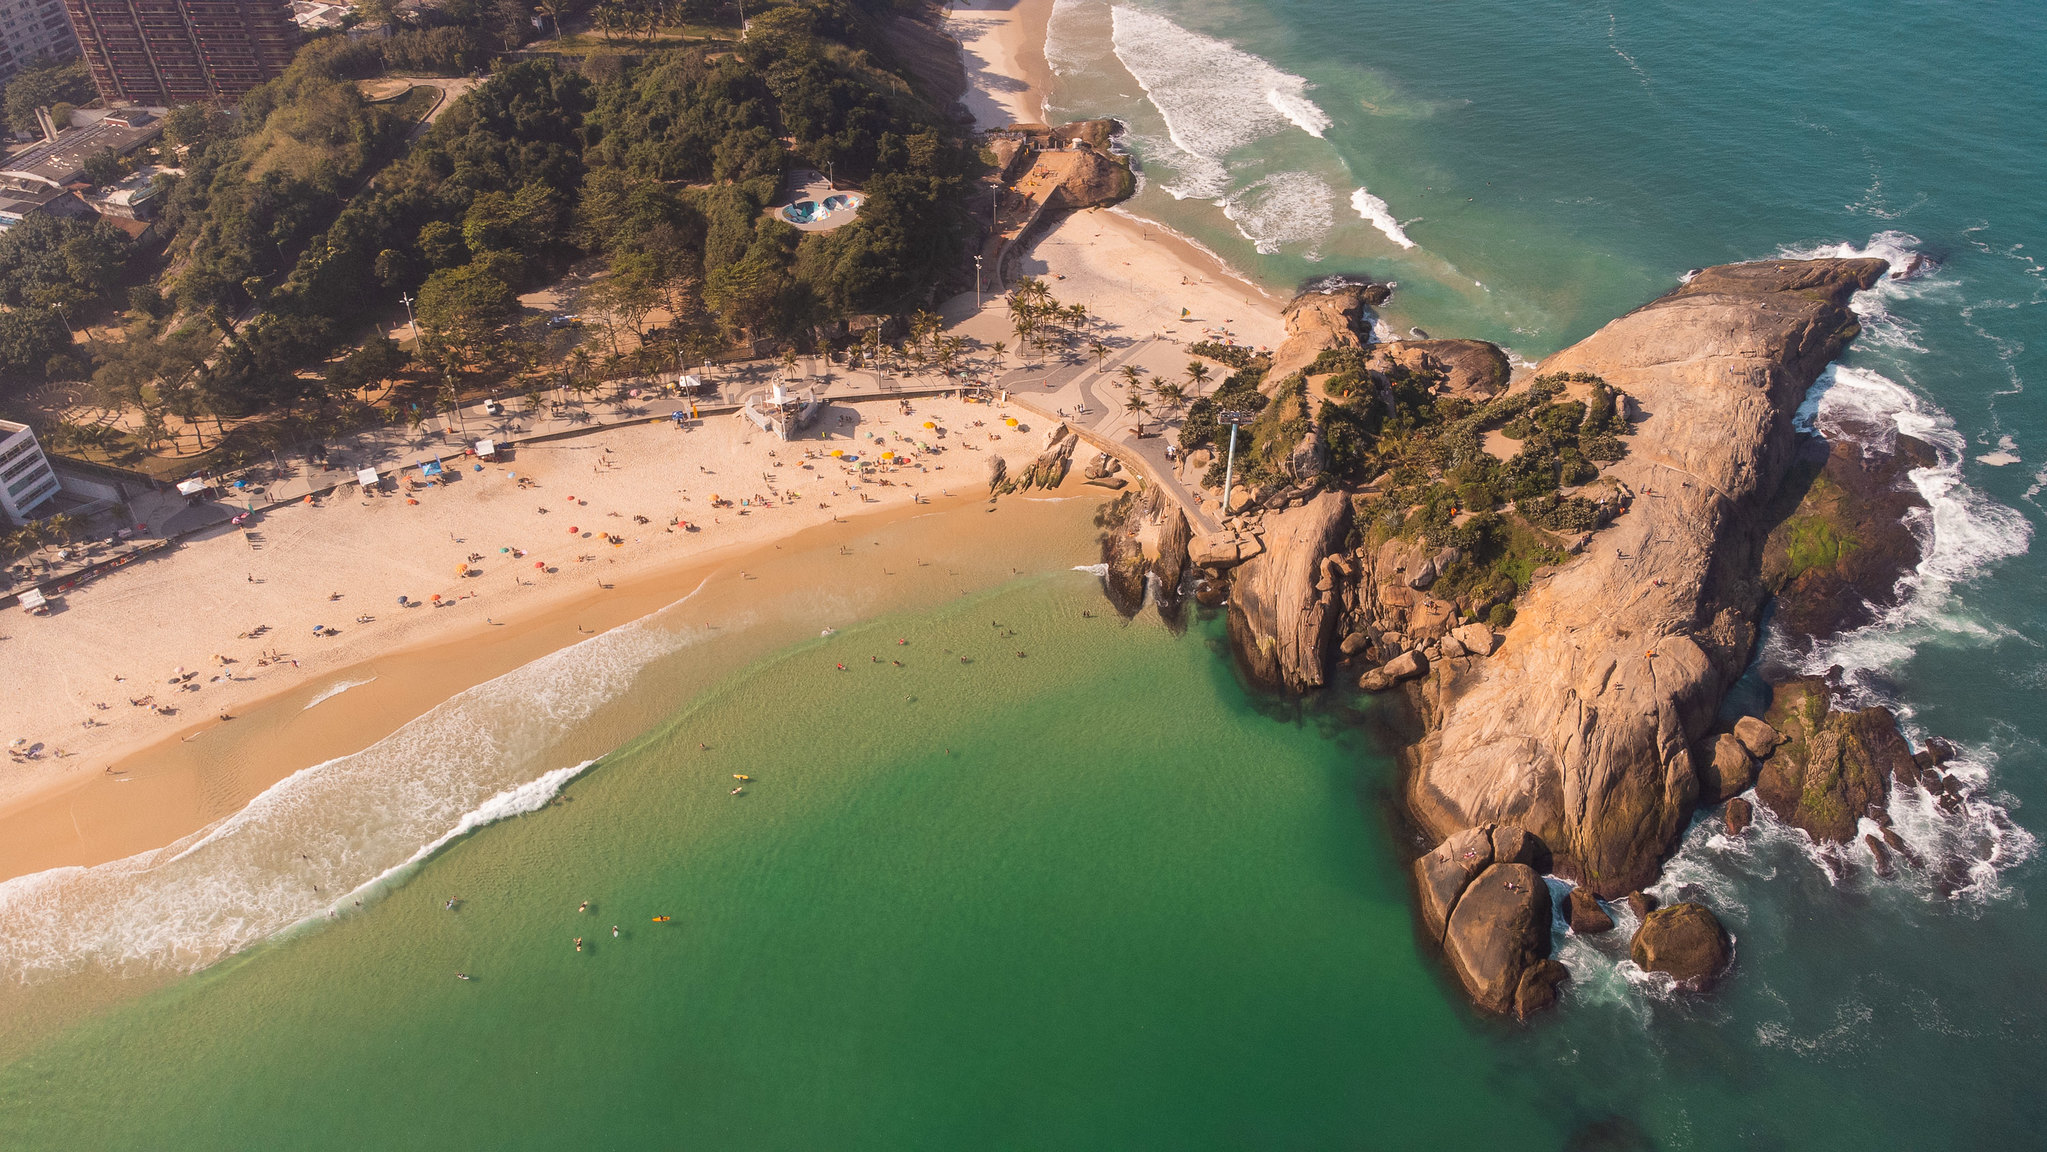 An aerial view of a stretch of sand lining a bay. A large cluster of rock abuts the beach at the point where it meets the next bay. Image: Riotur